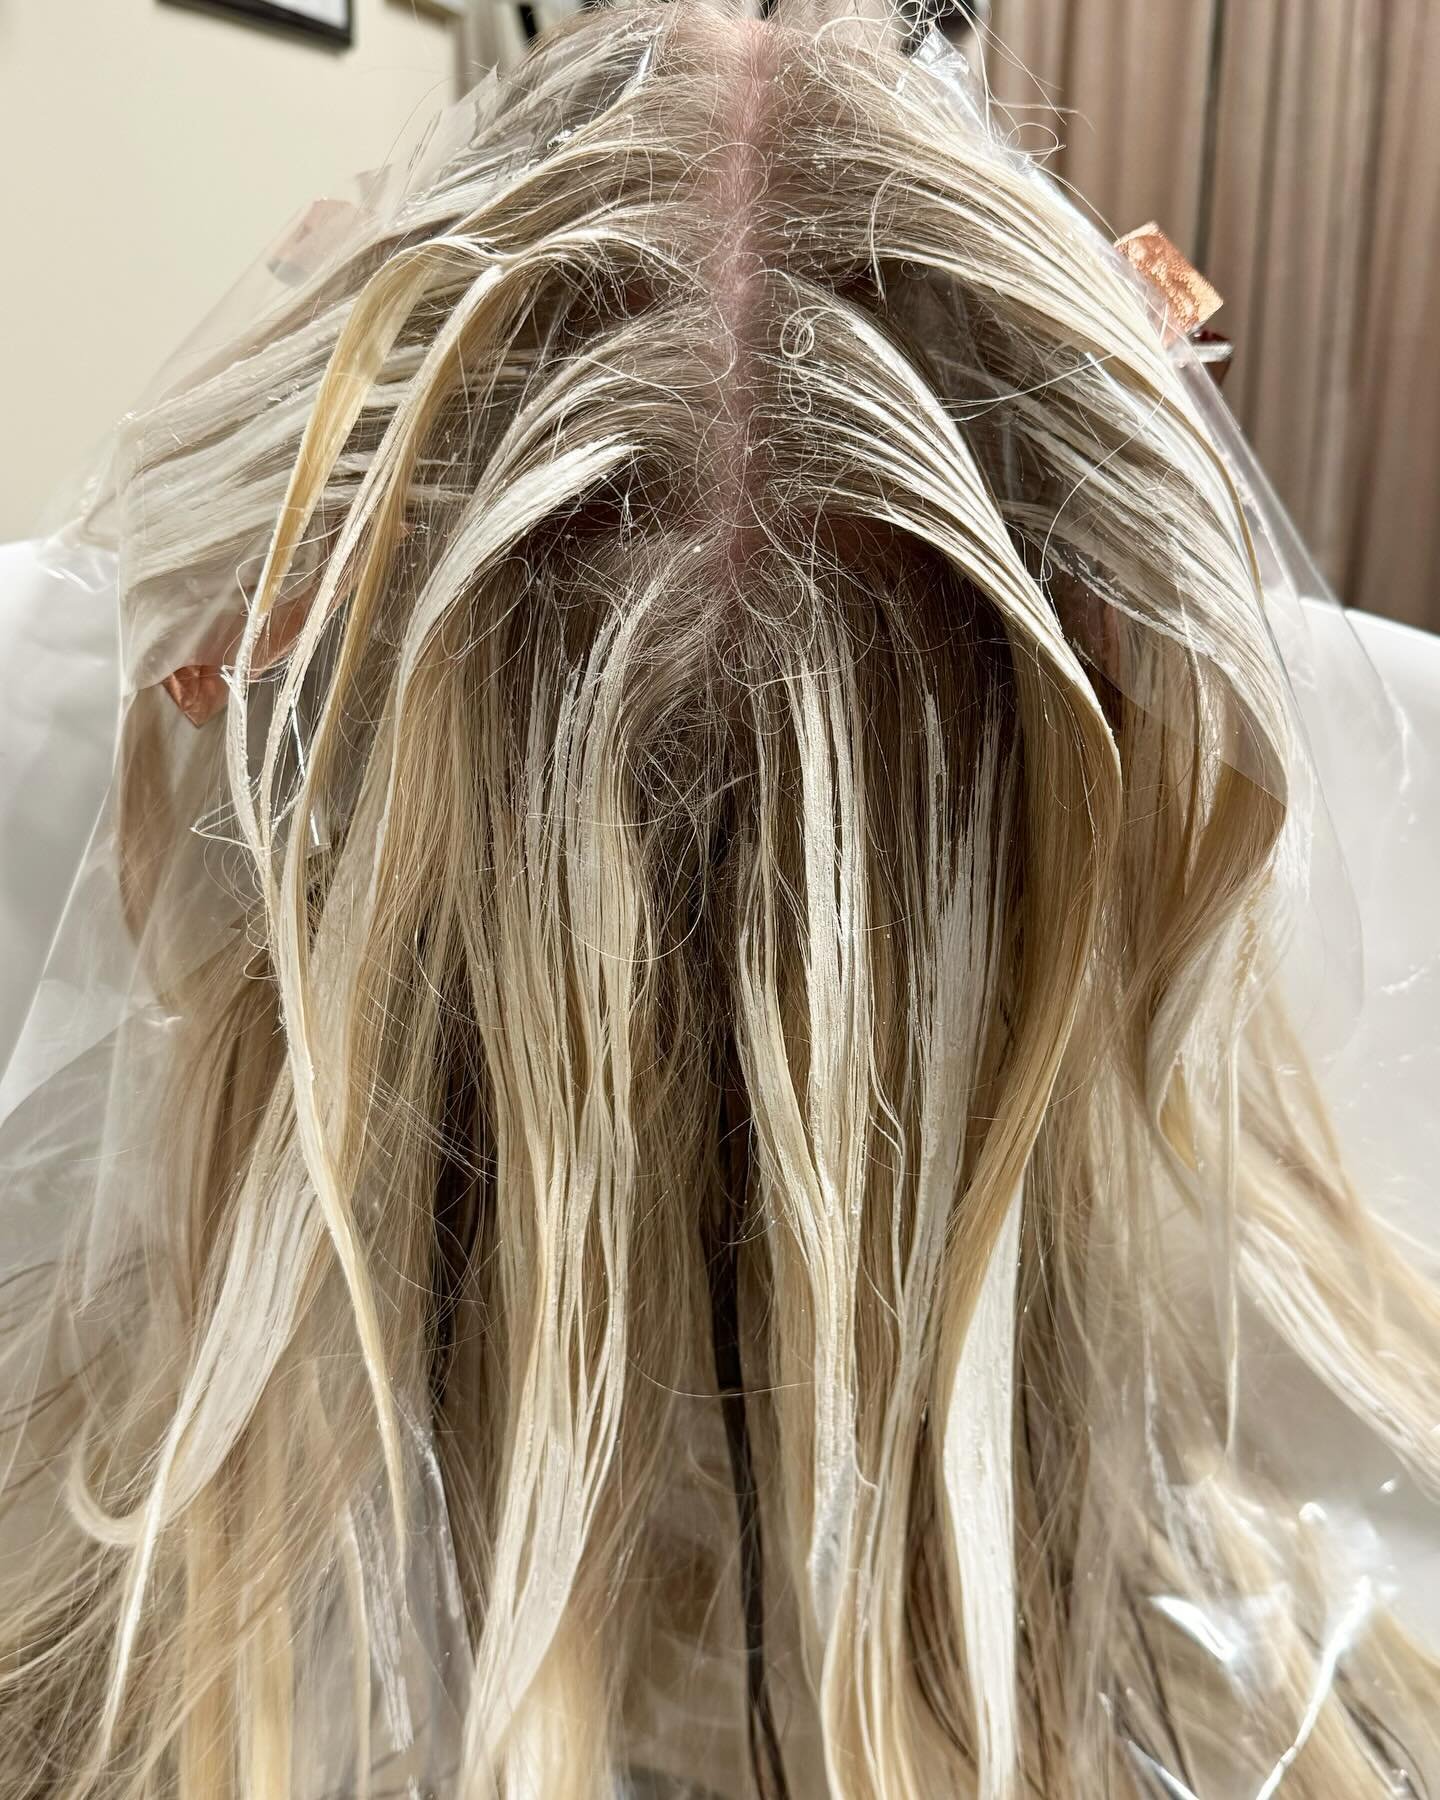 #balayage &amp; #lowlight combo application moves me every time 😍
&bull;
&bull;
&bull;
#nychairstylist #nychairstylists #nyc #hairsalon #nychaircolorist #nychairsalon #brooklyn #brooklynhairstylist #brooklynhairsalon